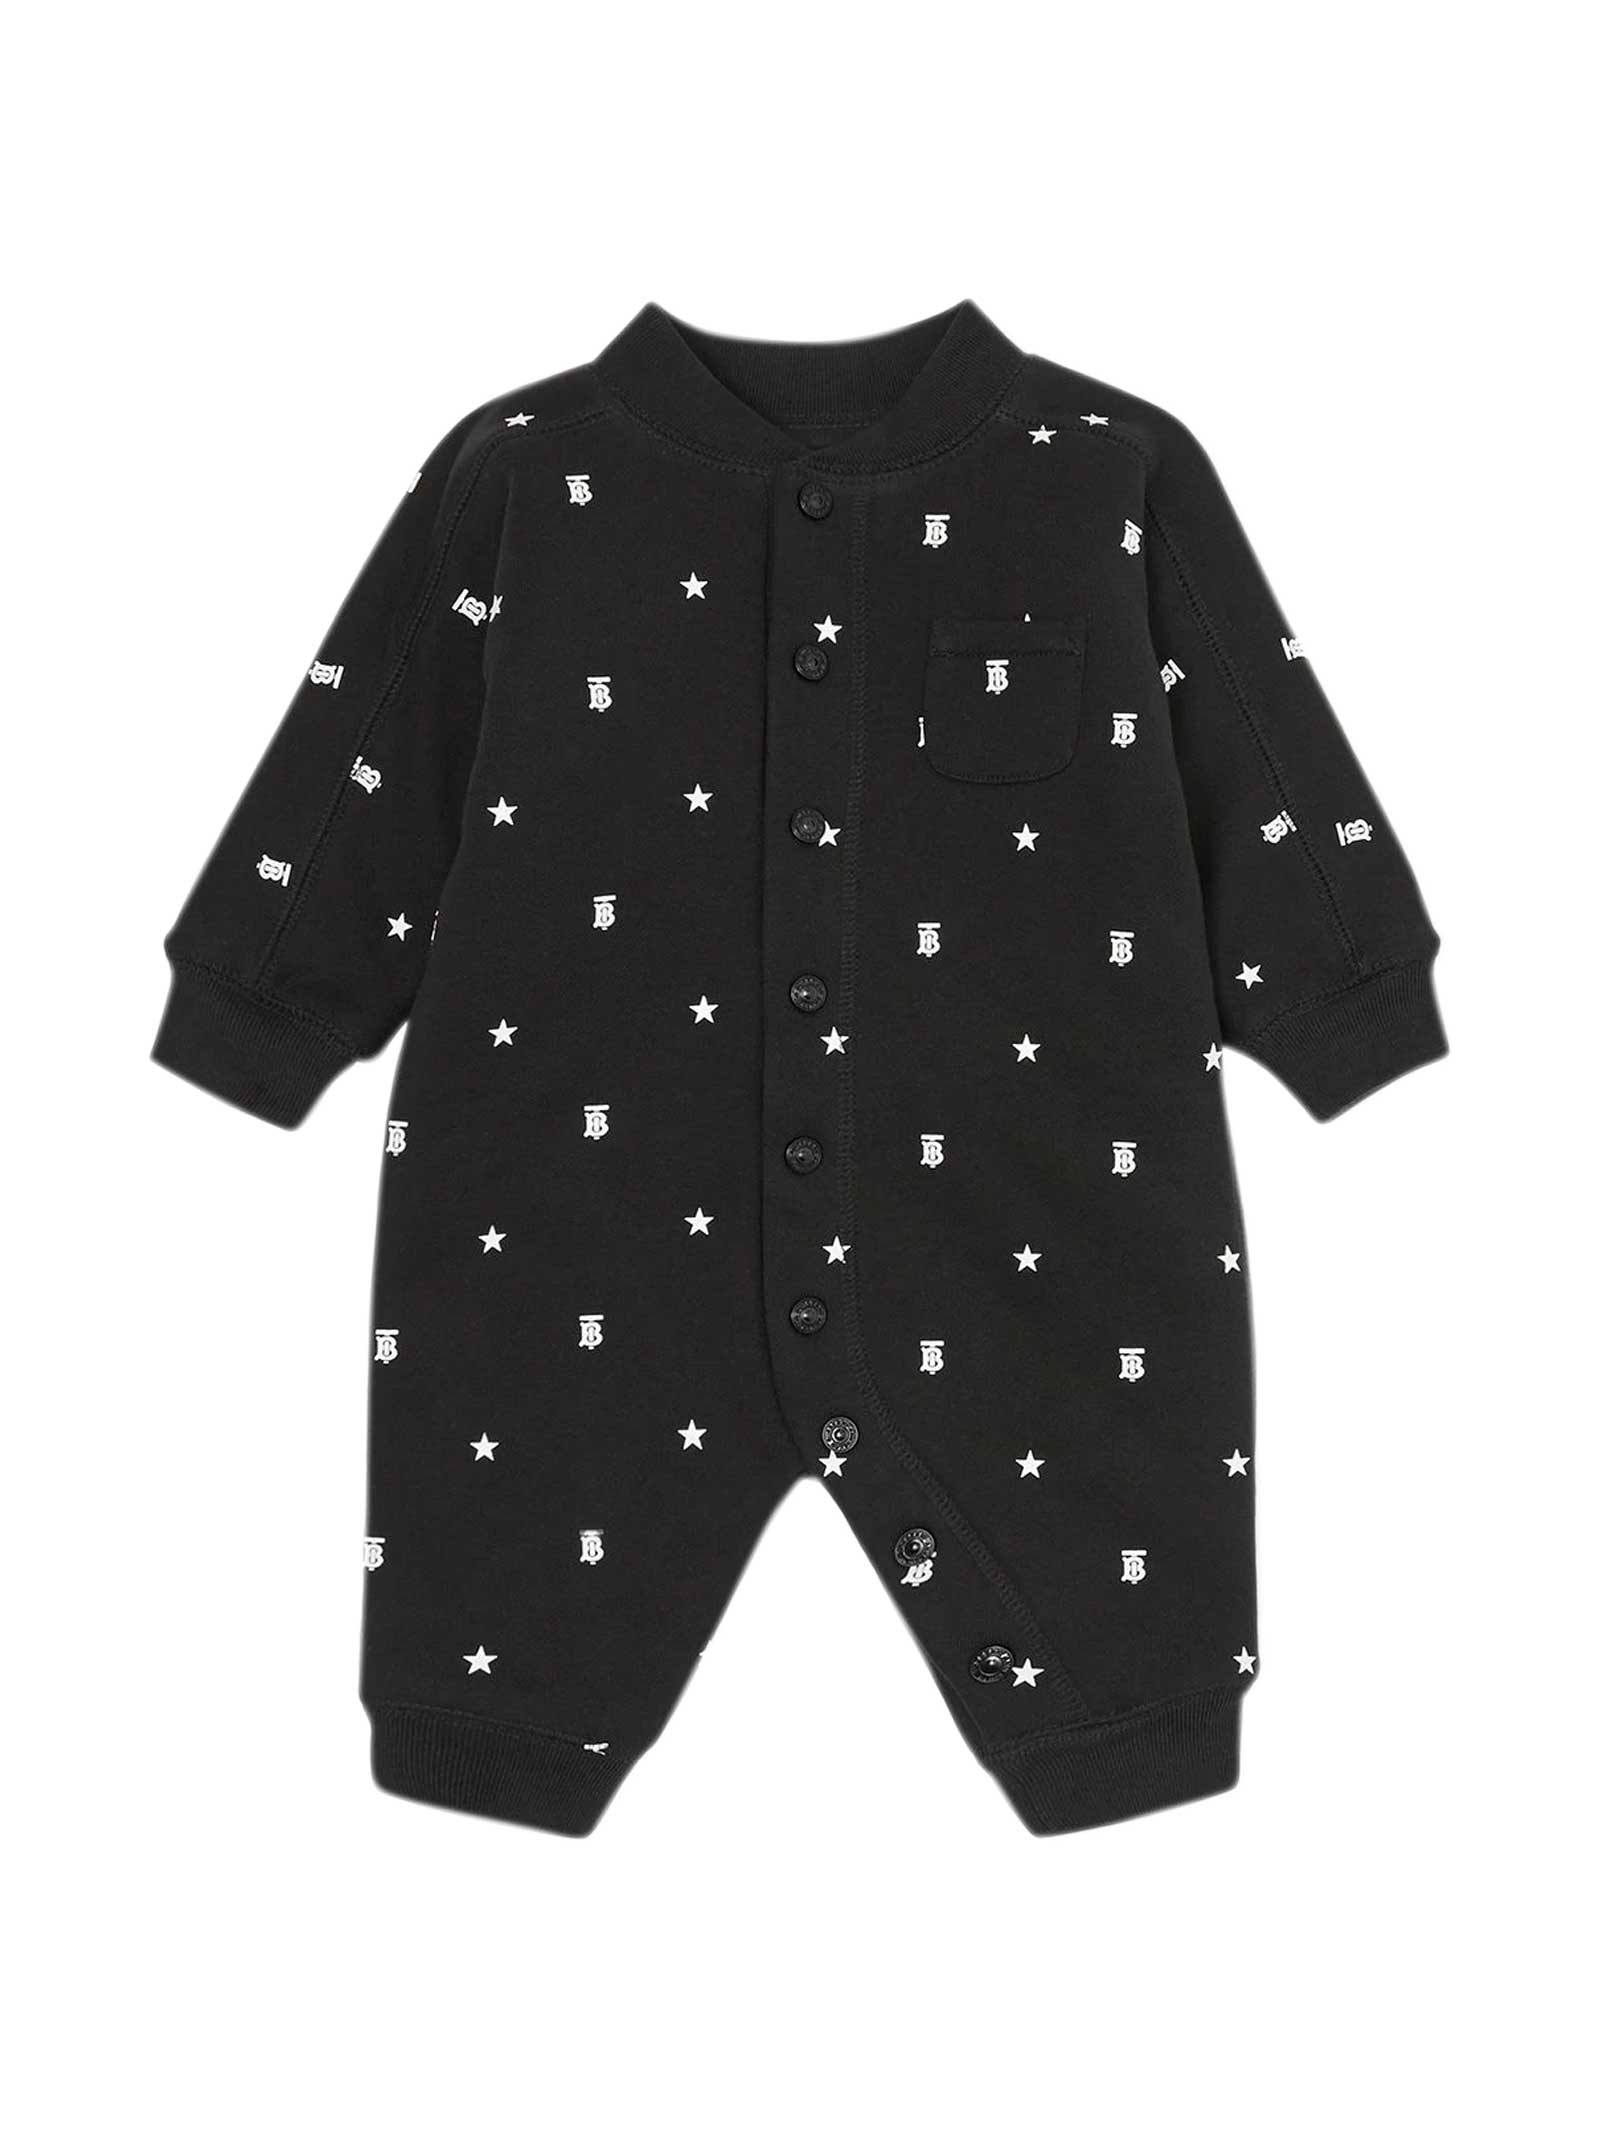 BURBERRY BLACK BABY SUIT,8036525 A1879